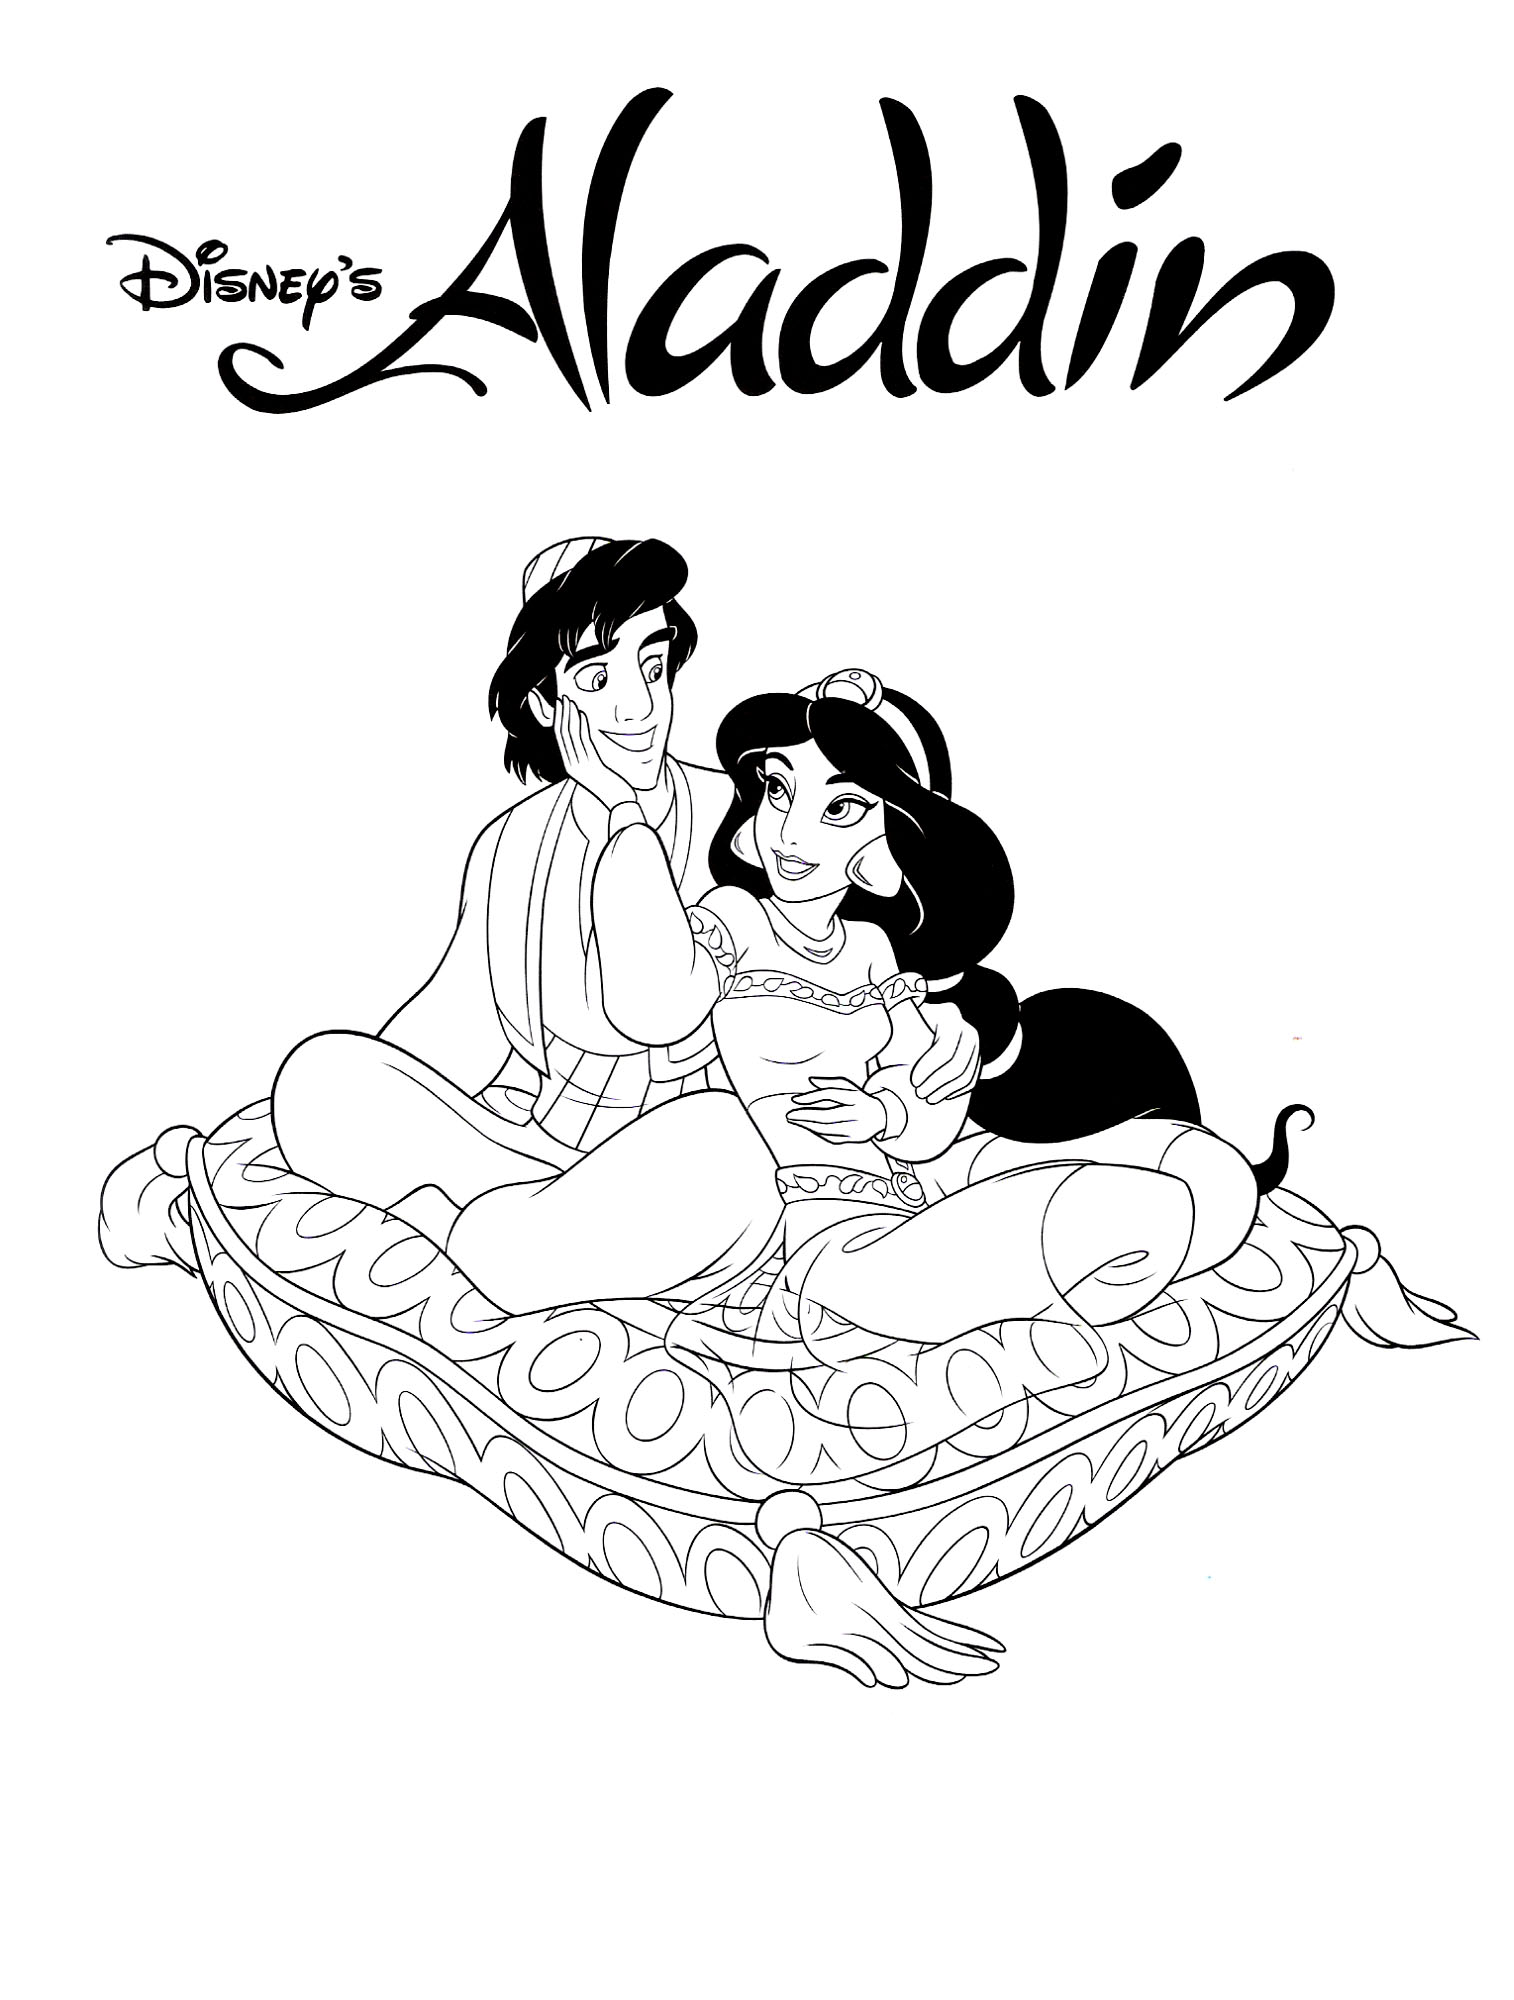 Aladdin Disney coloring page   free printable coloring pages on ...